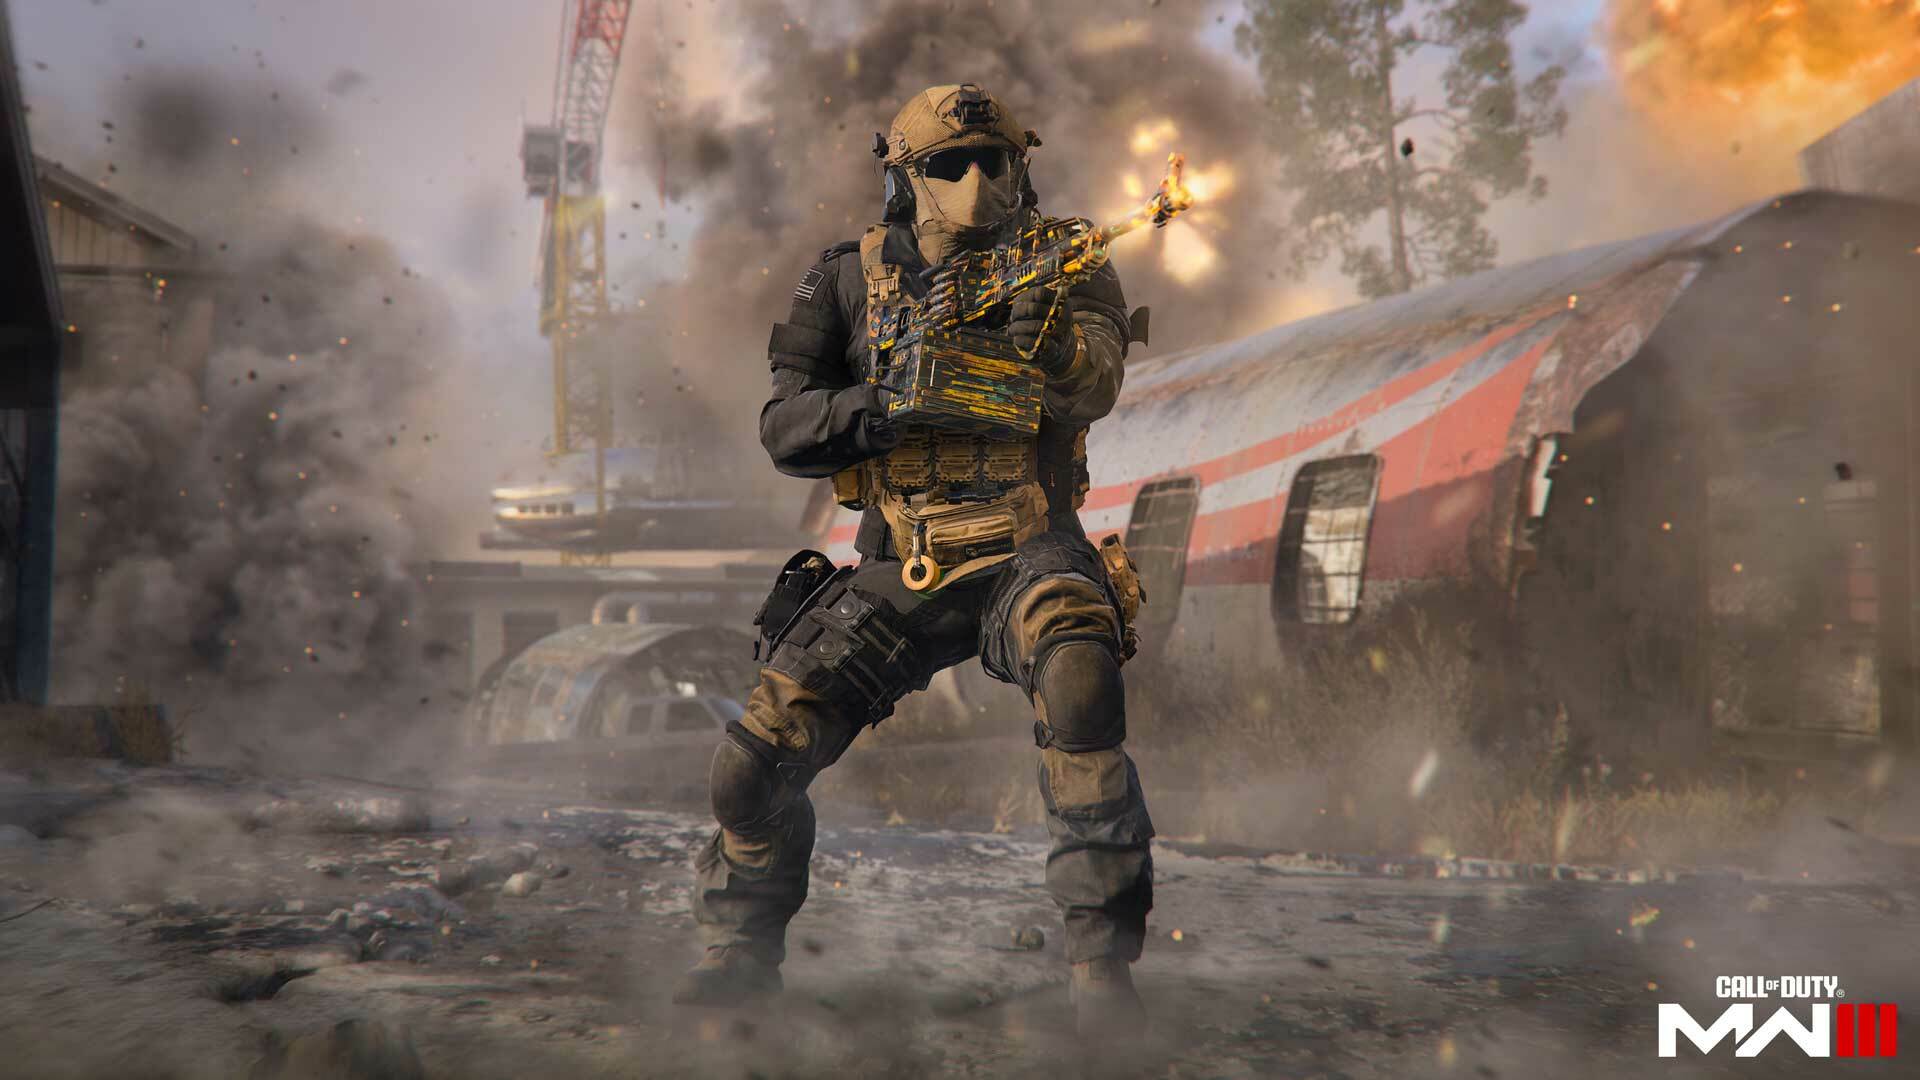 Call of Duty: Modern Warfare 3 - Here's What Comes in Each Edition